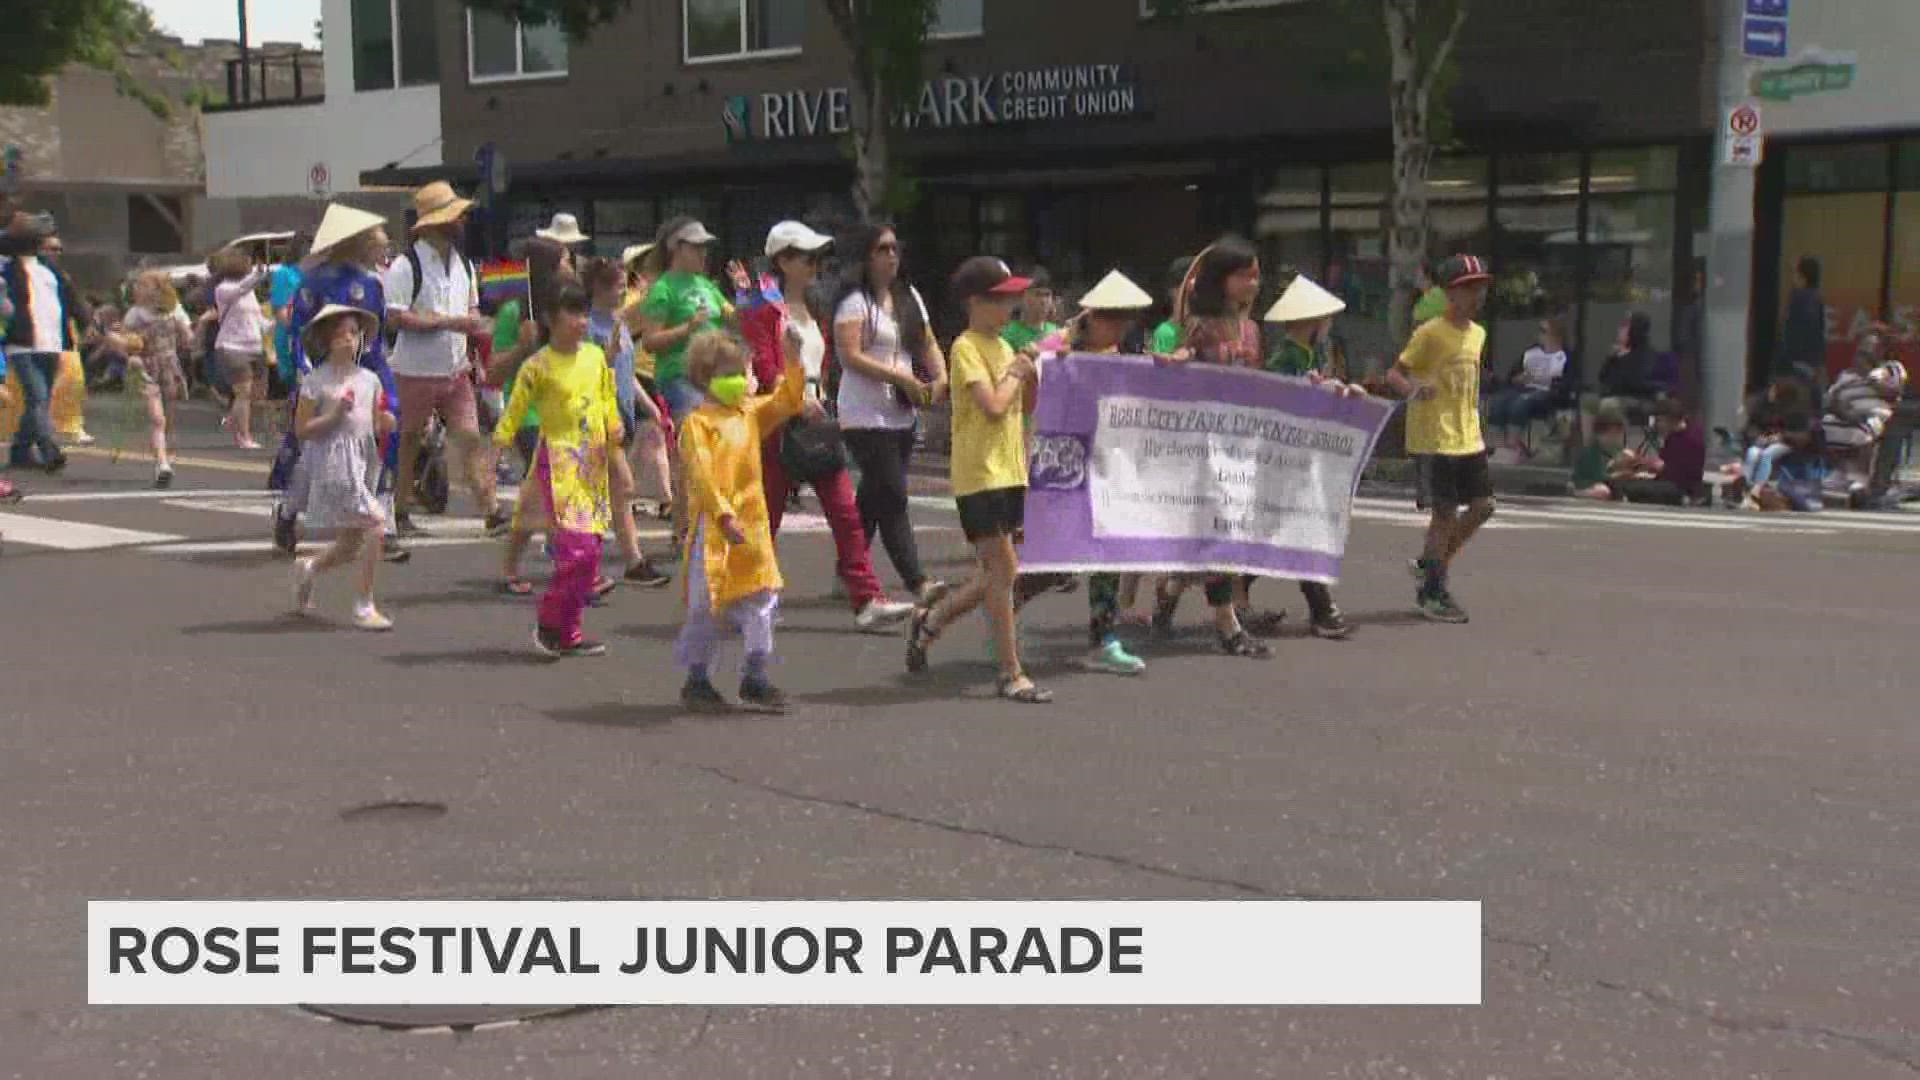 For the first time since 2019, thousands of people watched the Rose Festival's Junior Parade in person in Northeast Portland.